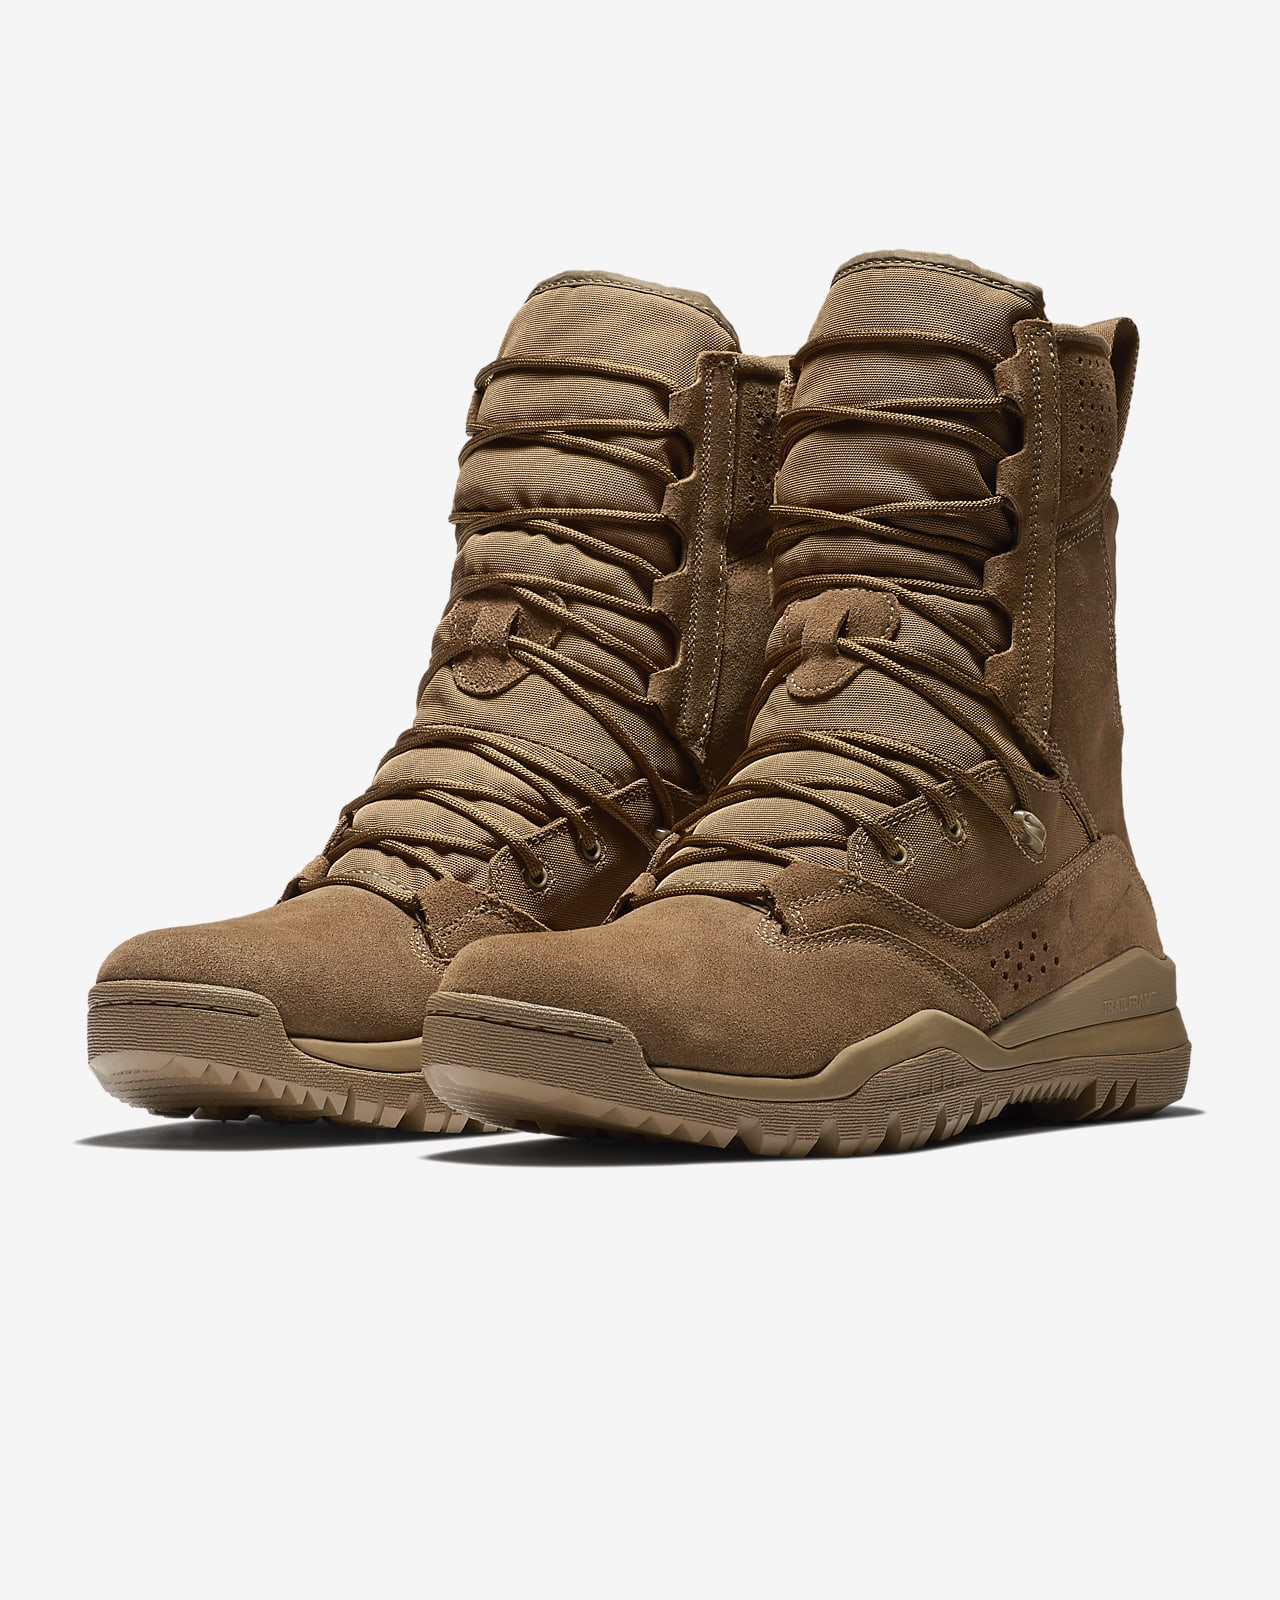 nike tactical boots price